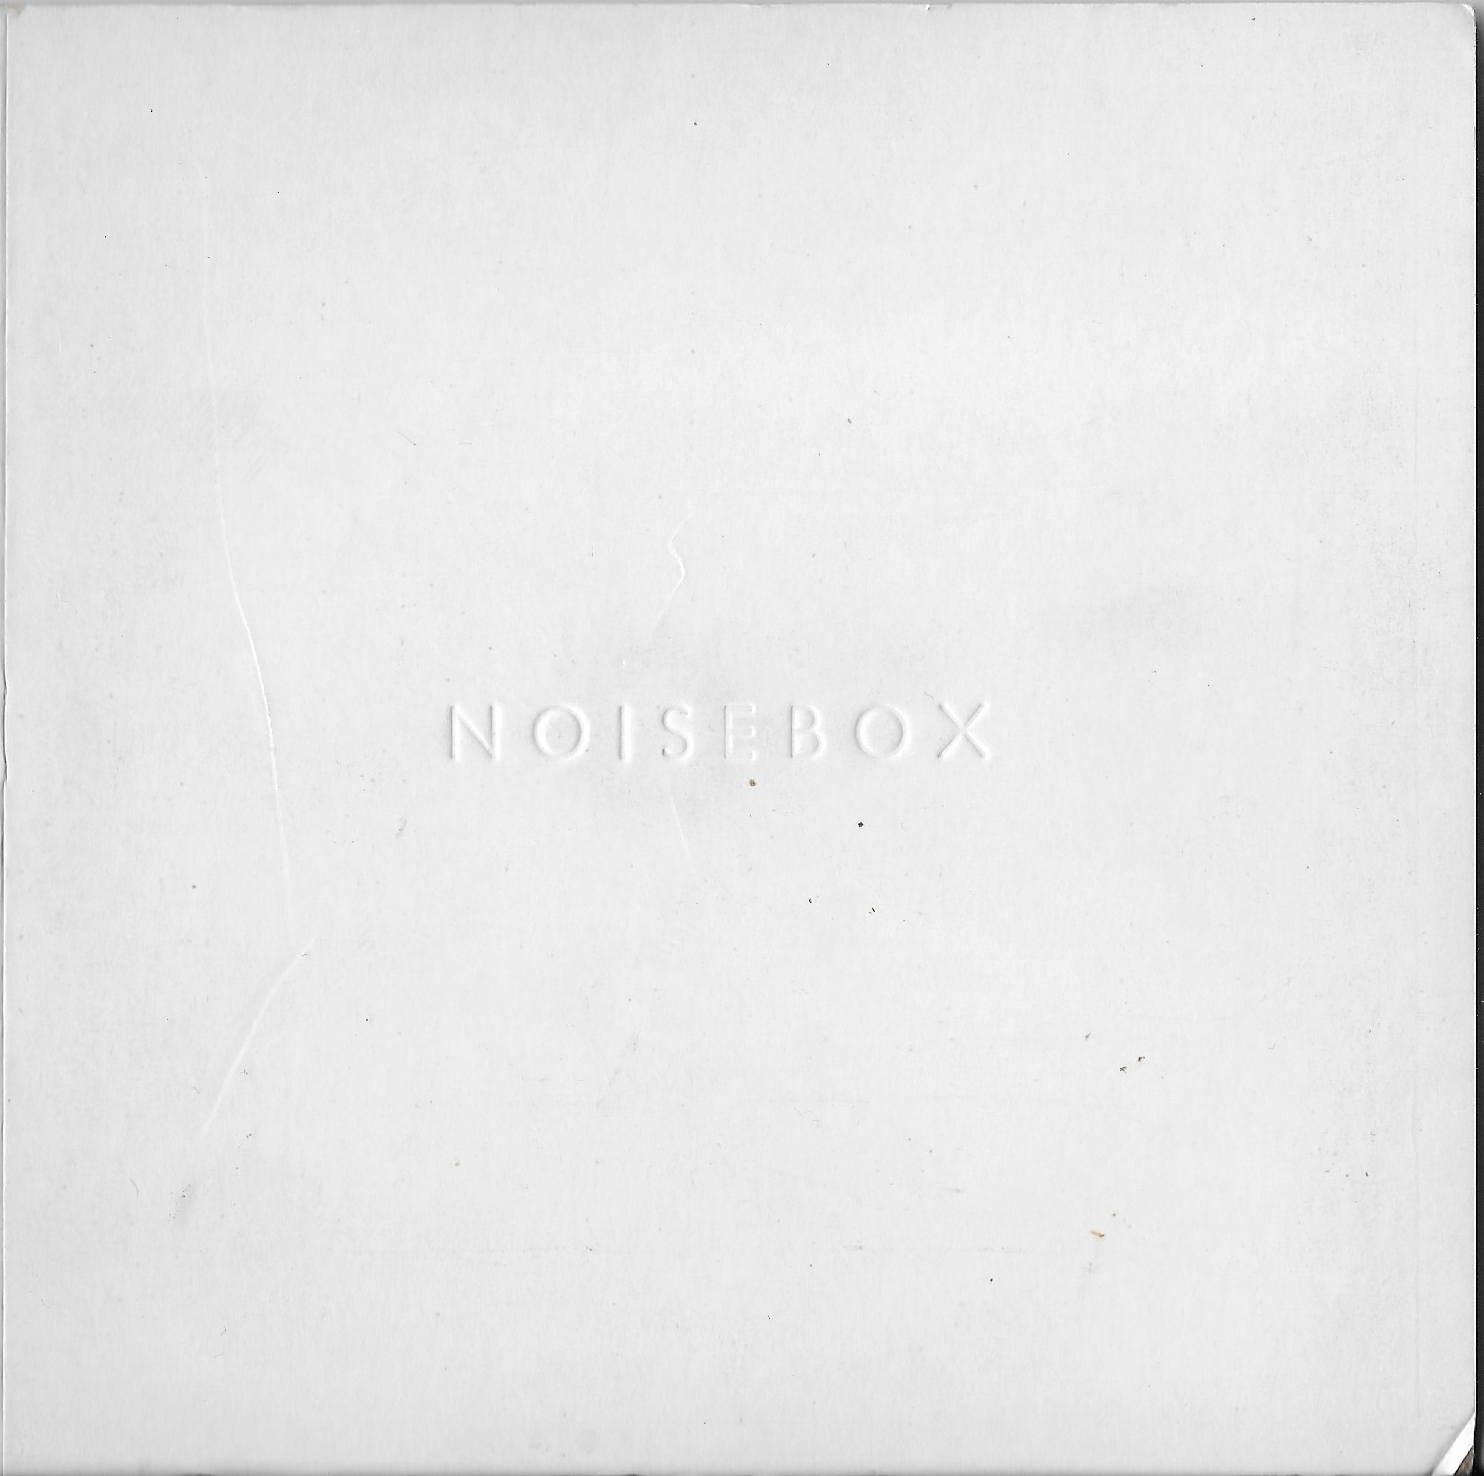 Picture of Now that's what I call Noisebox by artist Various 